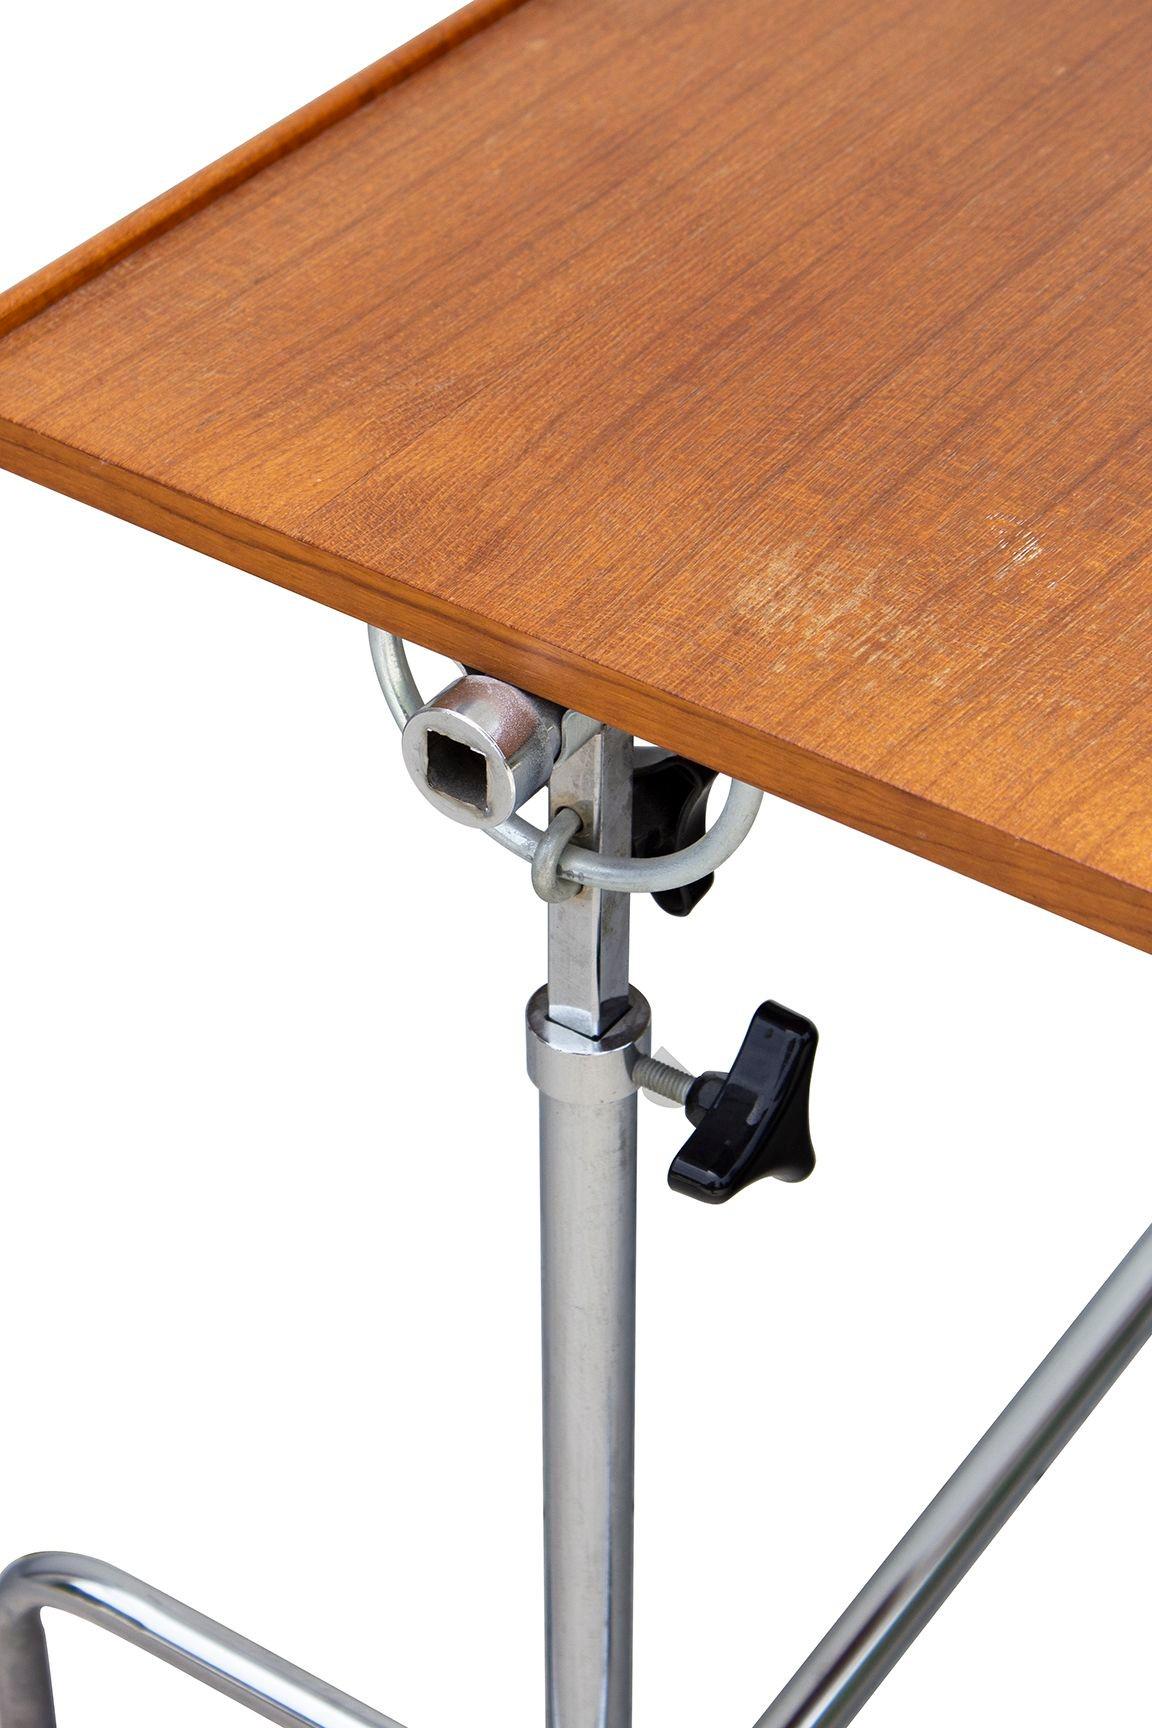 Chrome Danish Teak Rolling End Table with Adjustable Height by Danecastle ApS Denmark